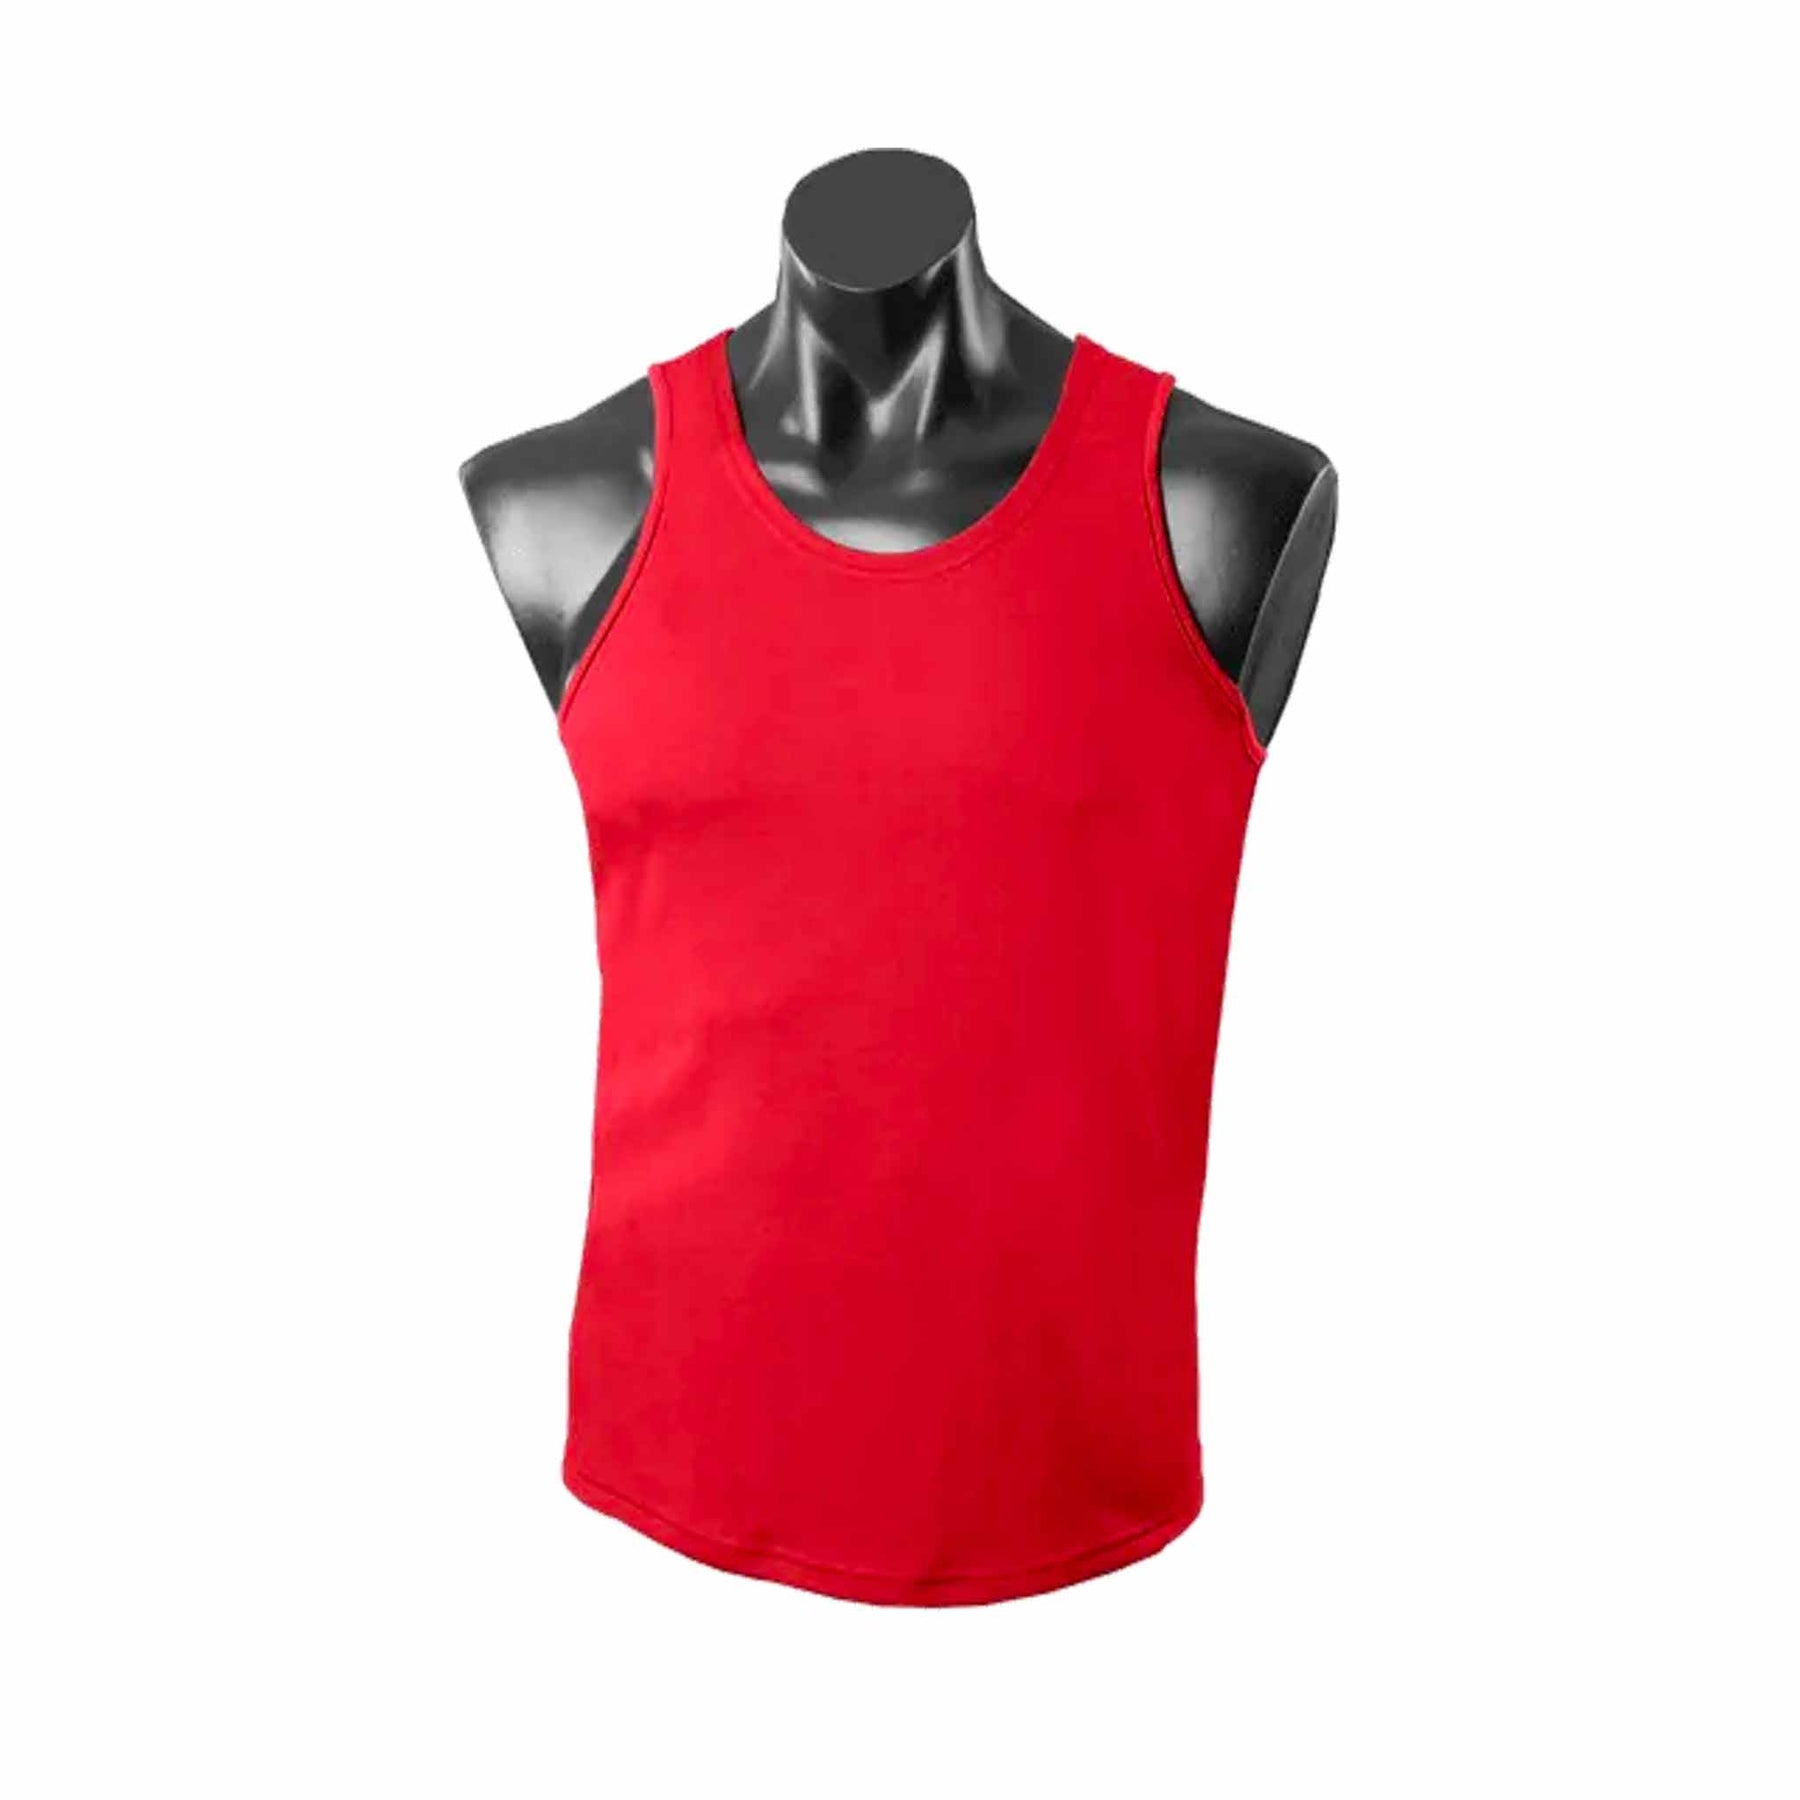 aussie pacific botany mens singlet in red